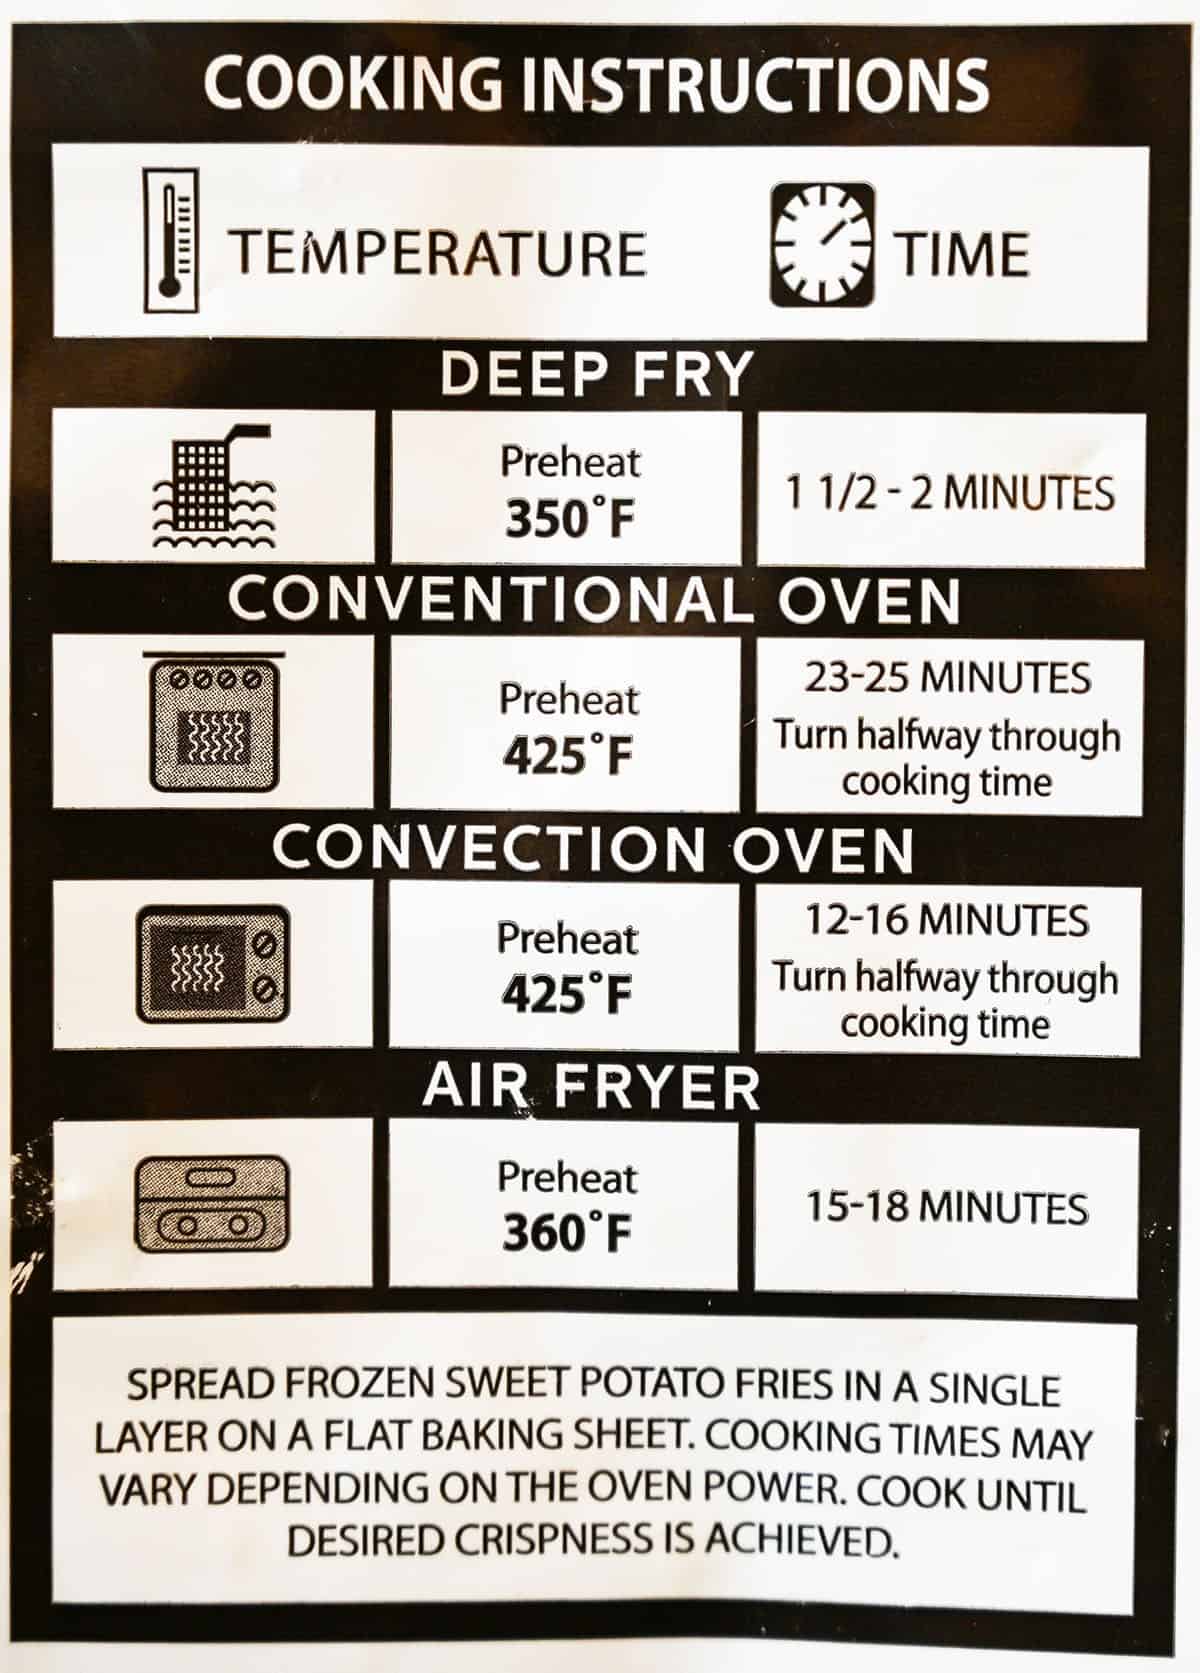 Costco Russet House Sweet Potato Fries cooking instructions from bag. 